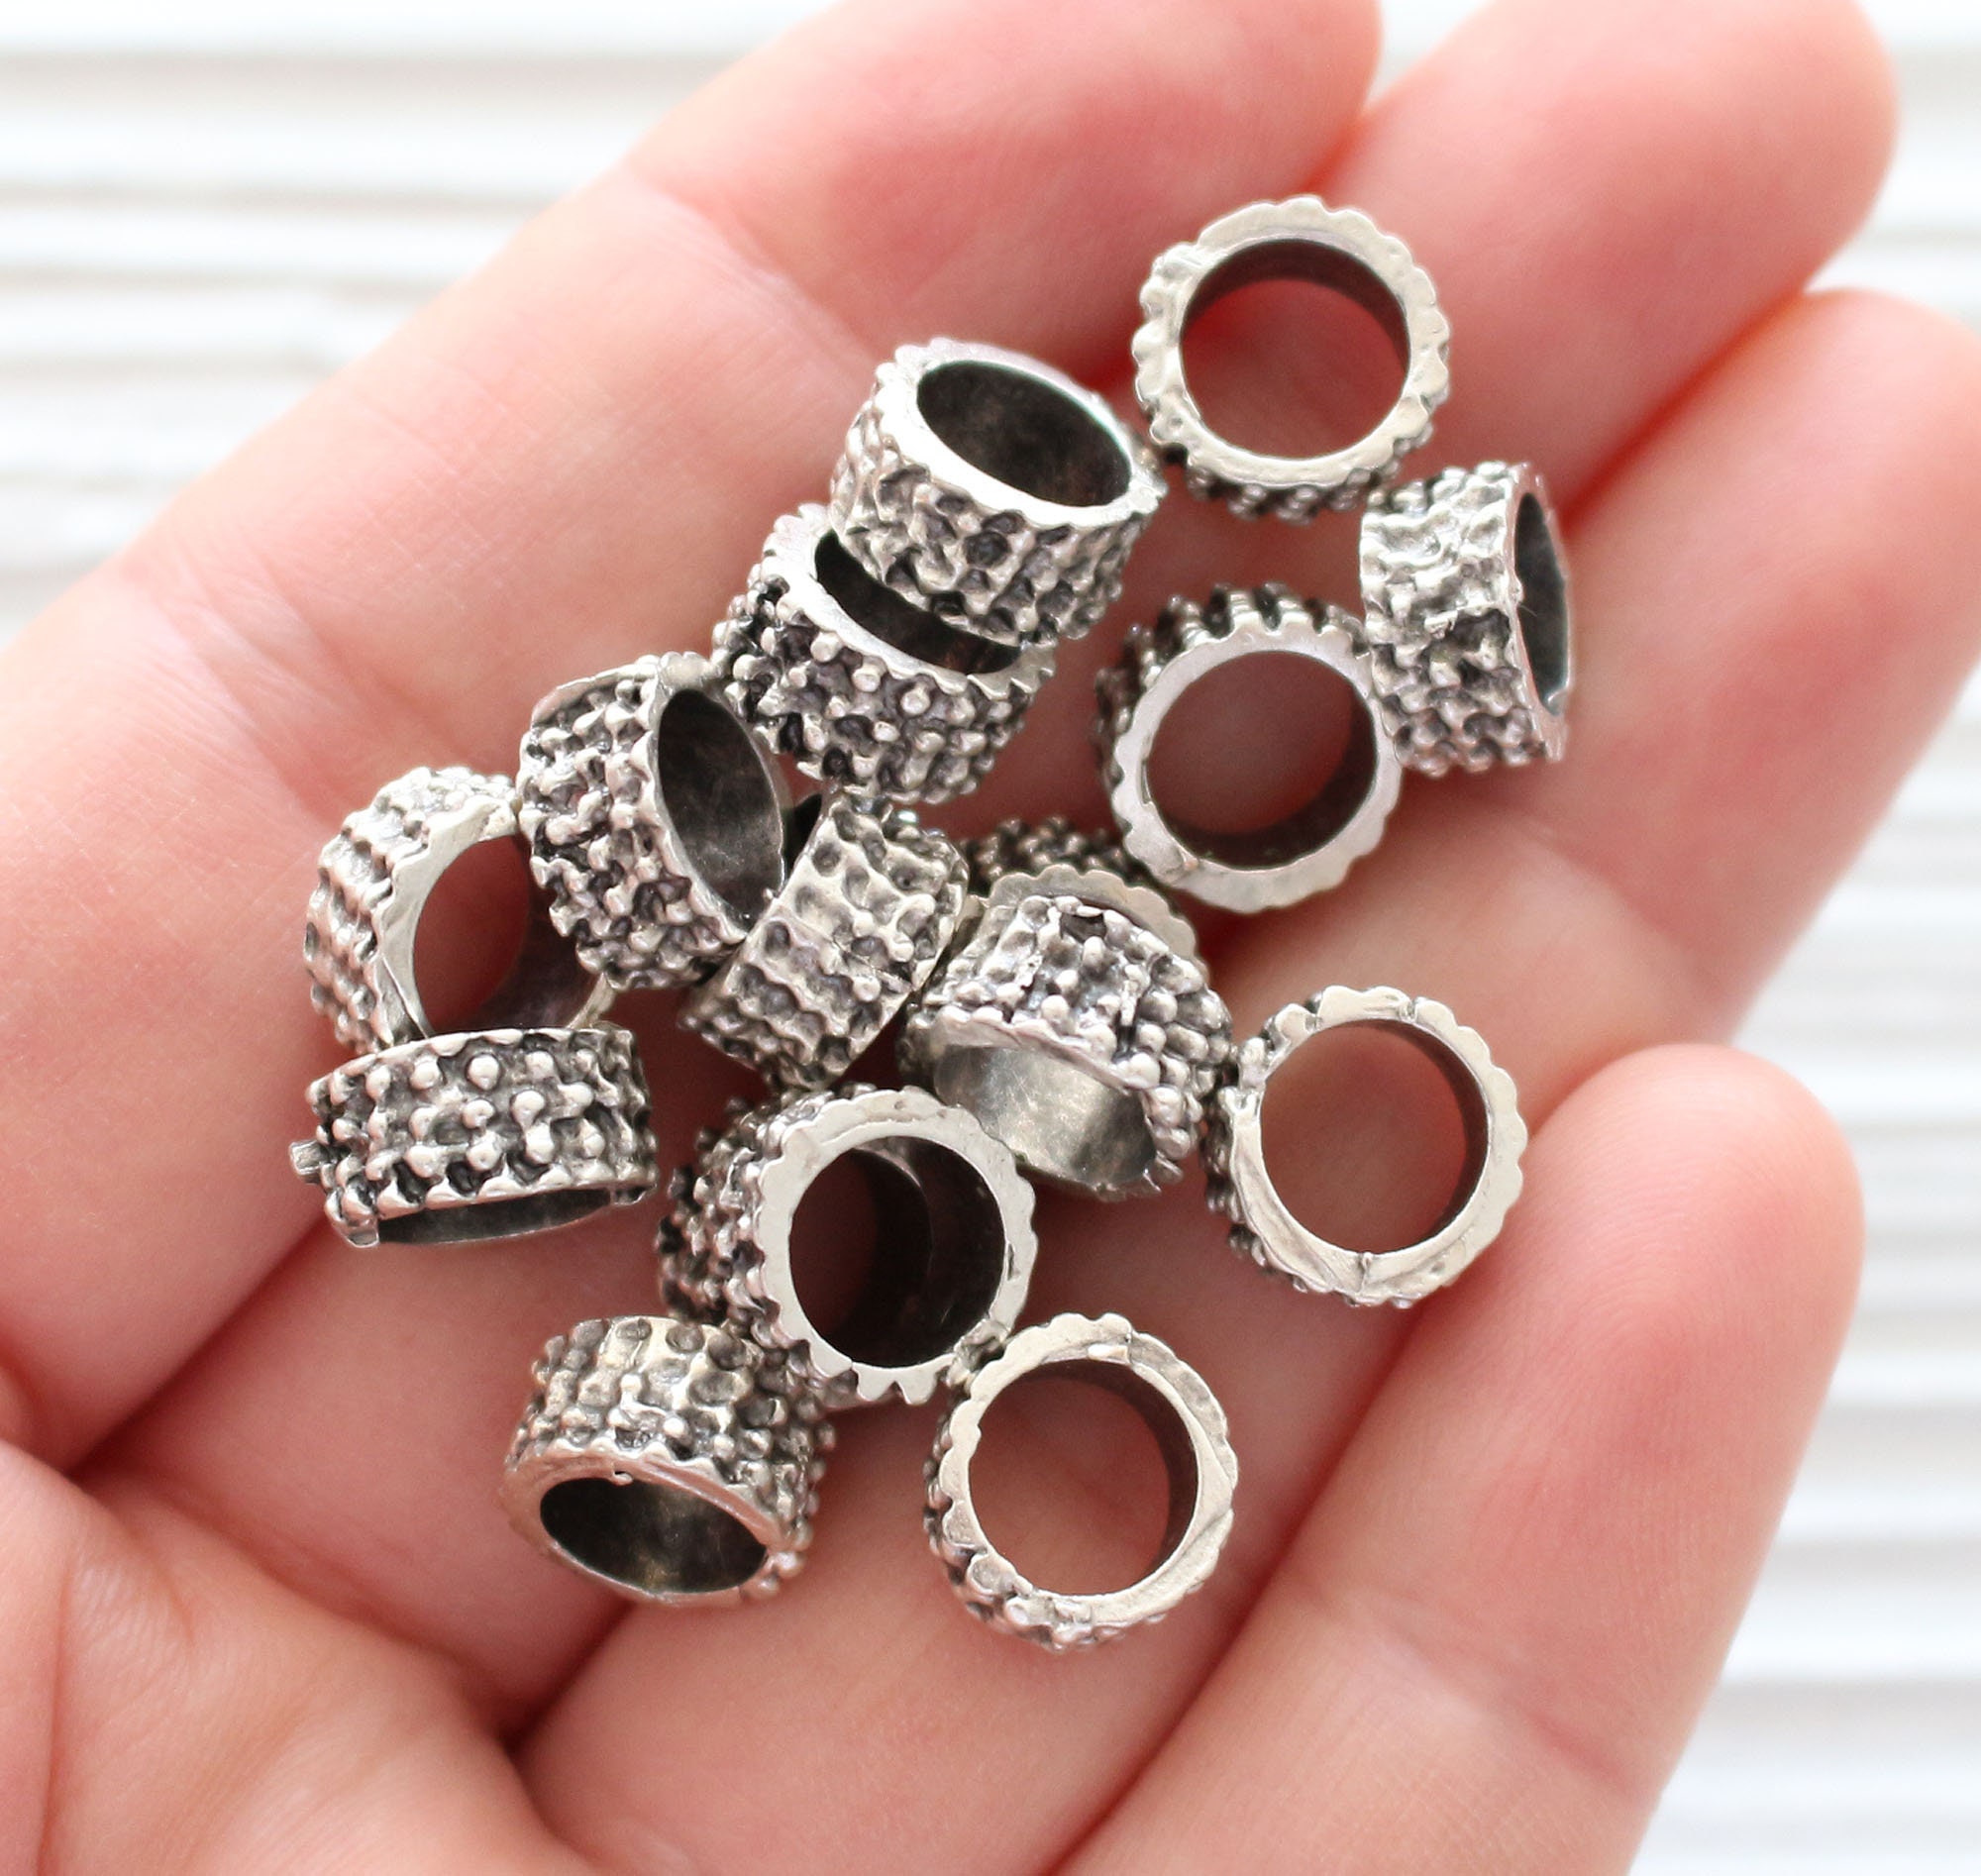 10pc rondelle beads silver, large round circle beads, rondelle spacers,  slider beads, rustic beads, large hole beads, bead spacers silver, M